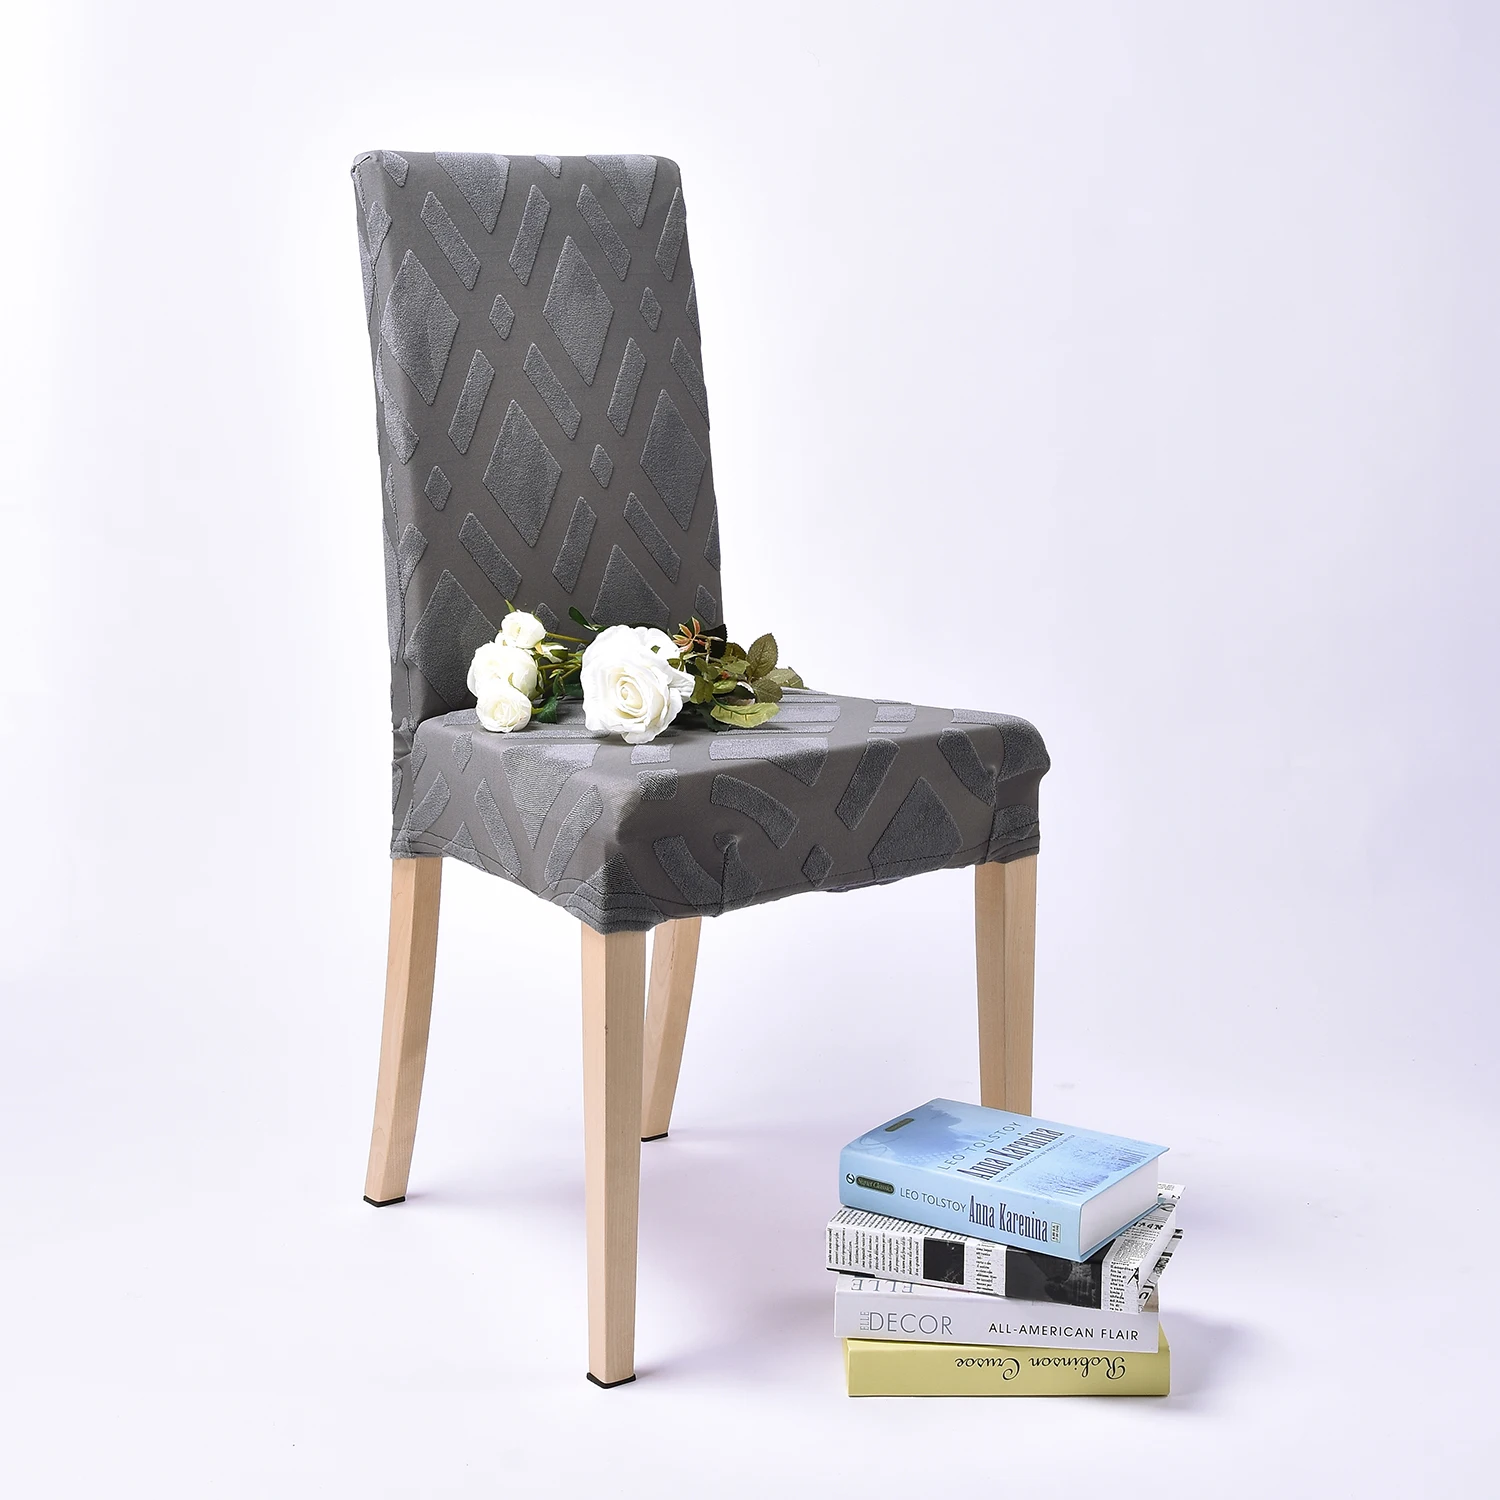 

Waterproof Grey Seat Cover Stretch Wedding Banquet Velvet Solid Printing Chair Cover For Home Party Decor Dining Room D20